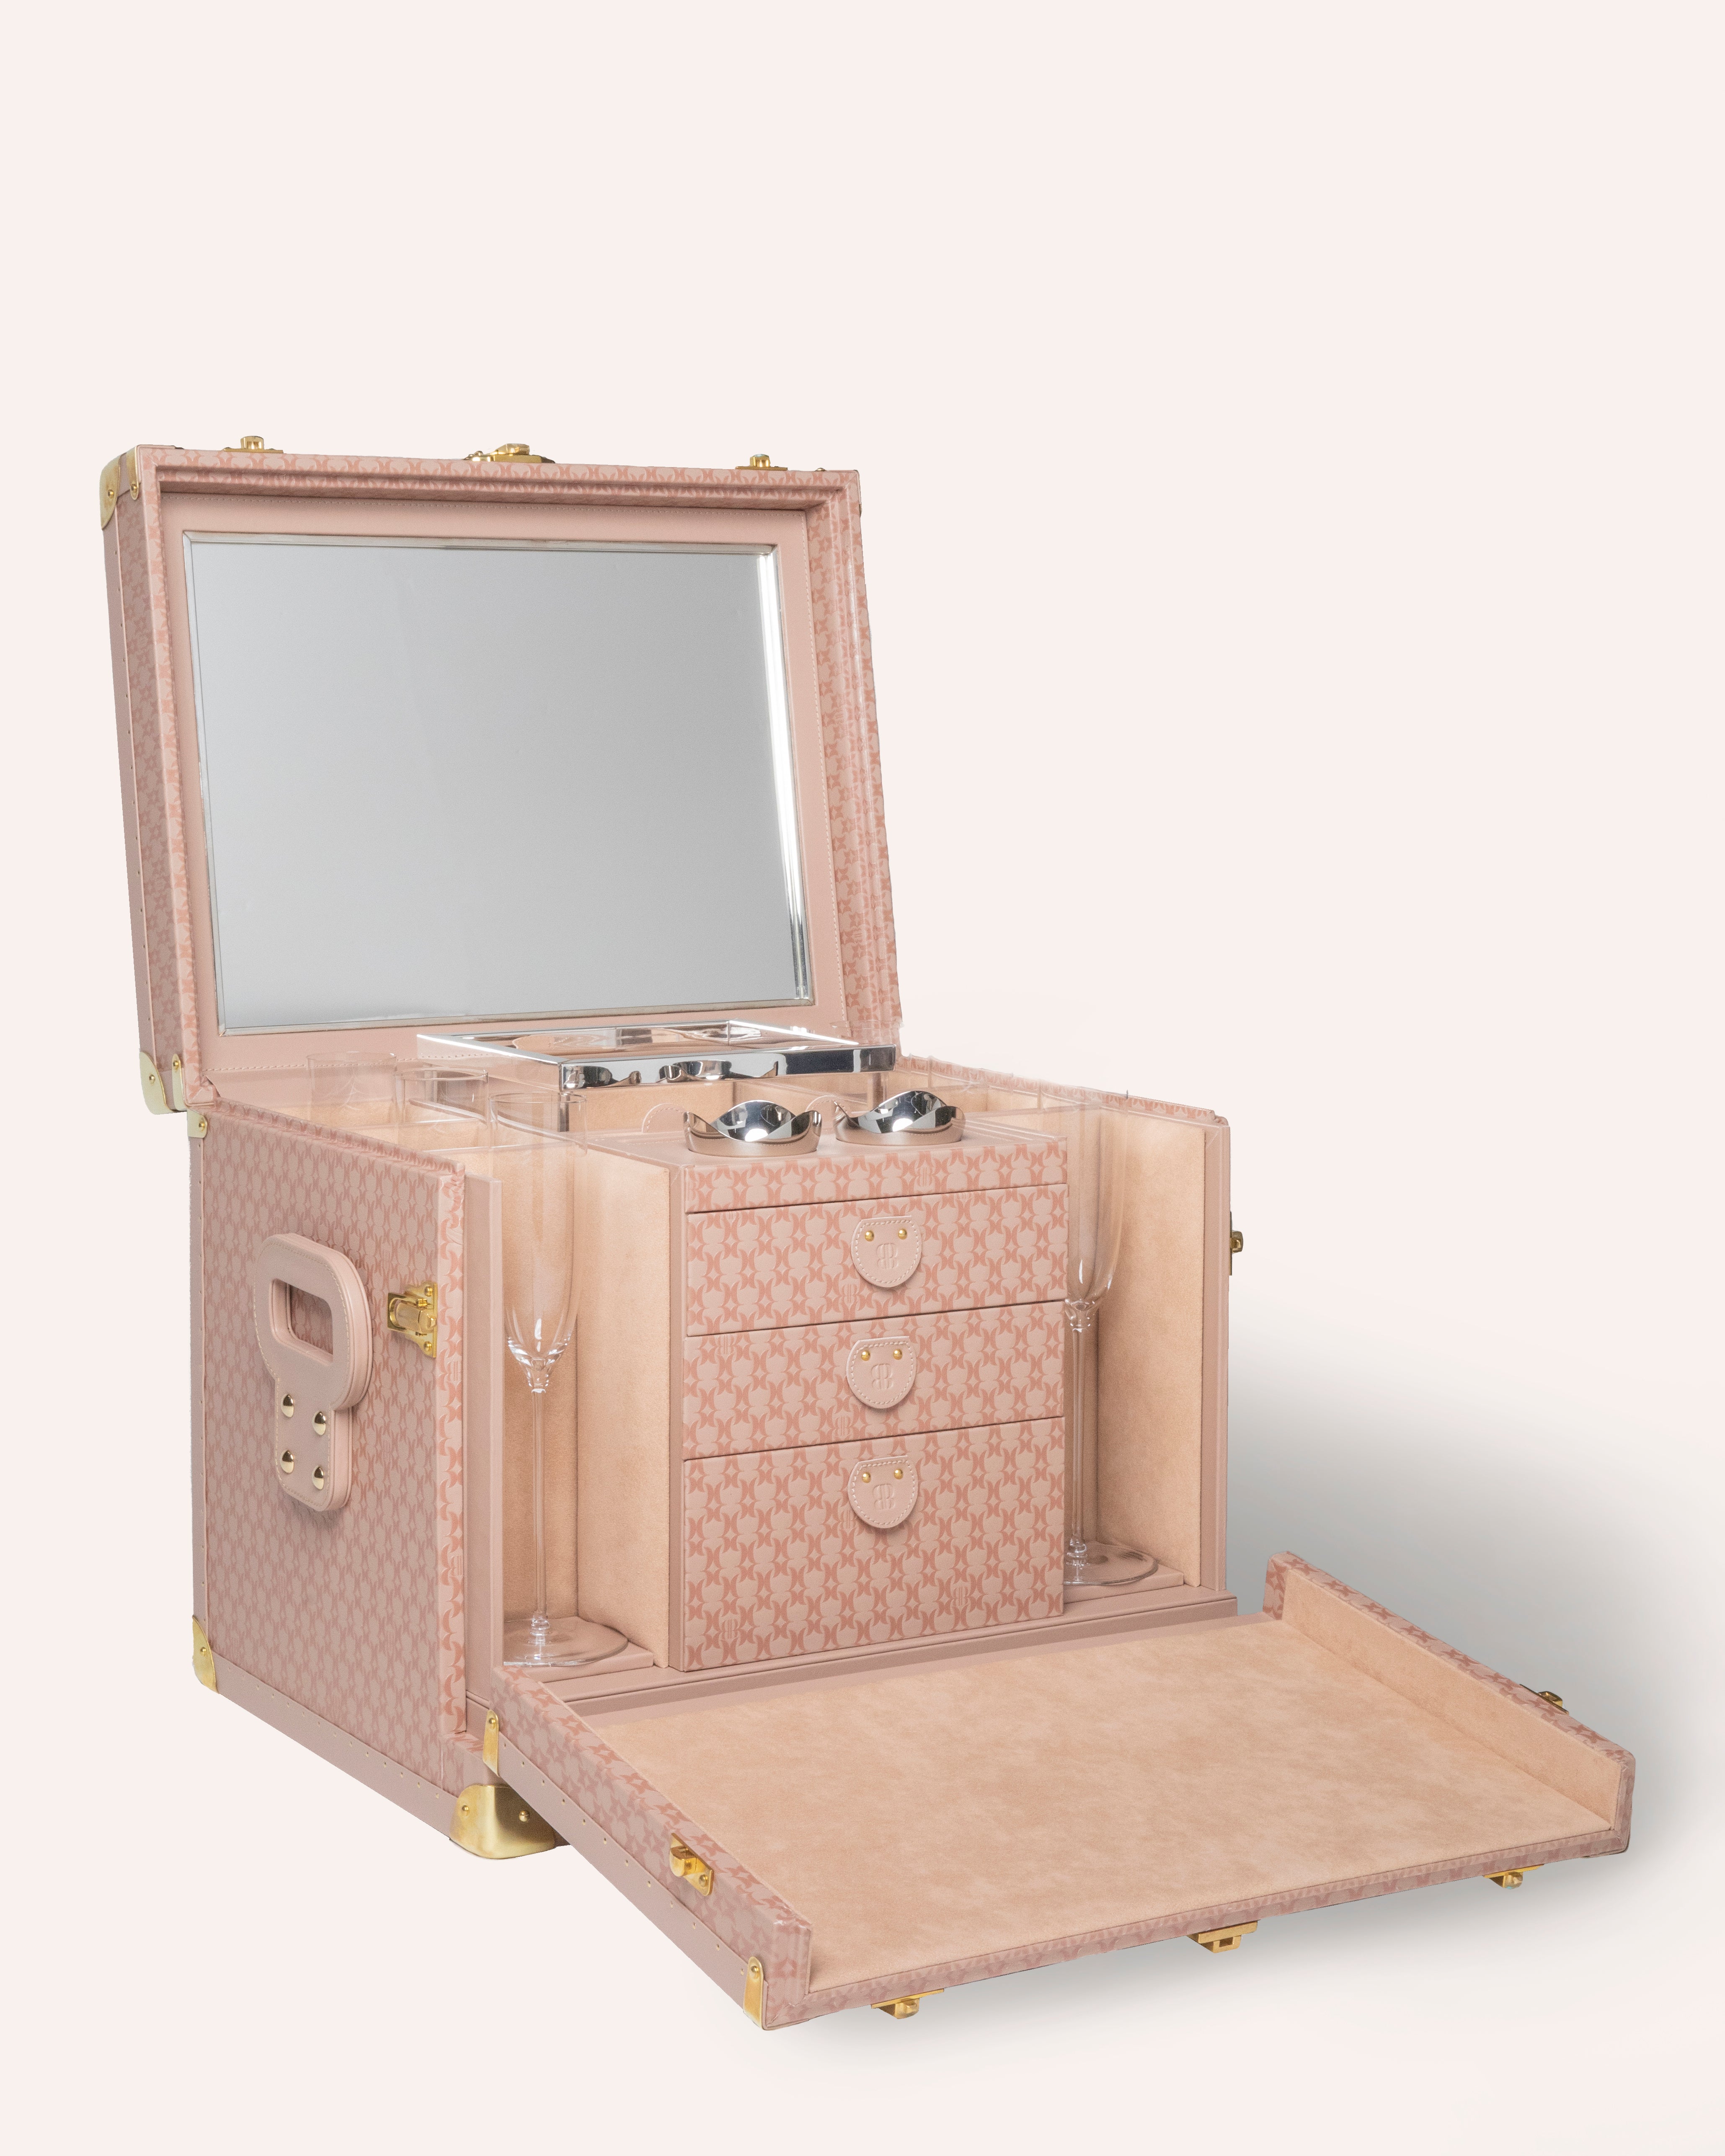 Bernardini Milano Champagne trunk - pink leather and alcantara - with 6 flutes and ice bucket